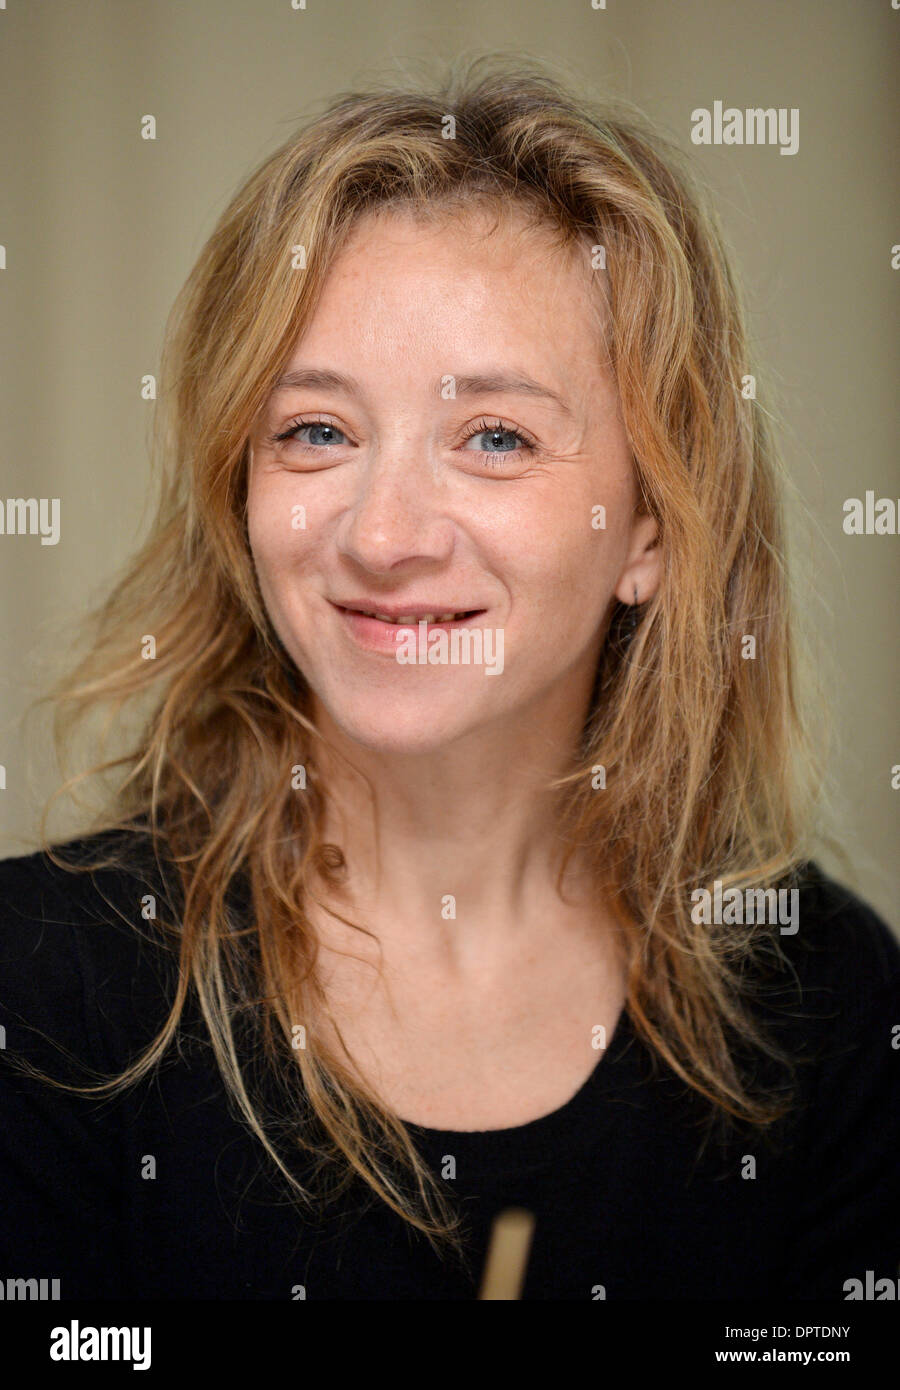 Bremen, Germany. 16th Jan, 2014. French actress Sylvie Testud attends a press conference in Bremen, Germany, 16 January 2014. Testud is awarded the Bremen Film Prize. Photo: CARMEN JASPERSEN/dpa/Alamy Live News Stock Photo